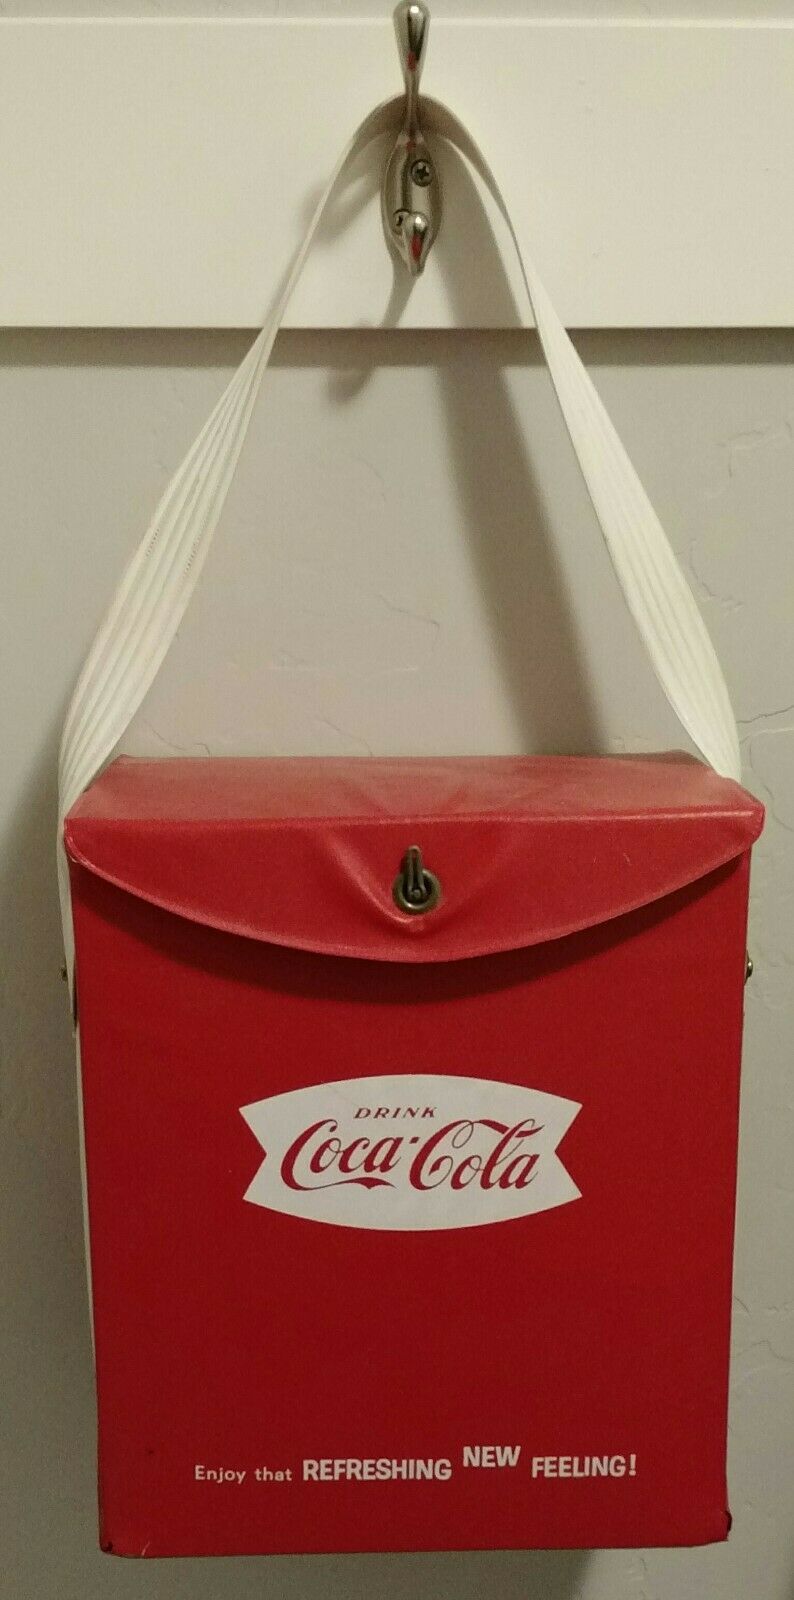 Coca Cola Vintage Insulated Vinyl Tote Cooler Enjoy That Refreshing New Feeling!